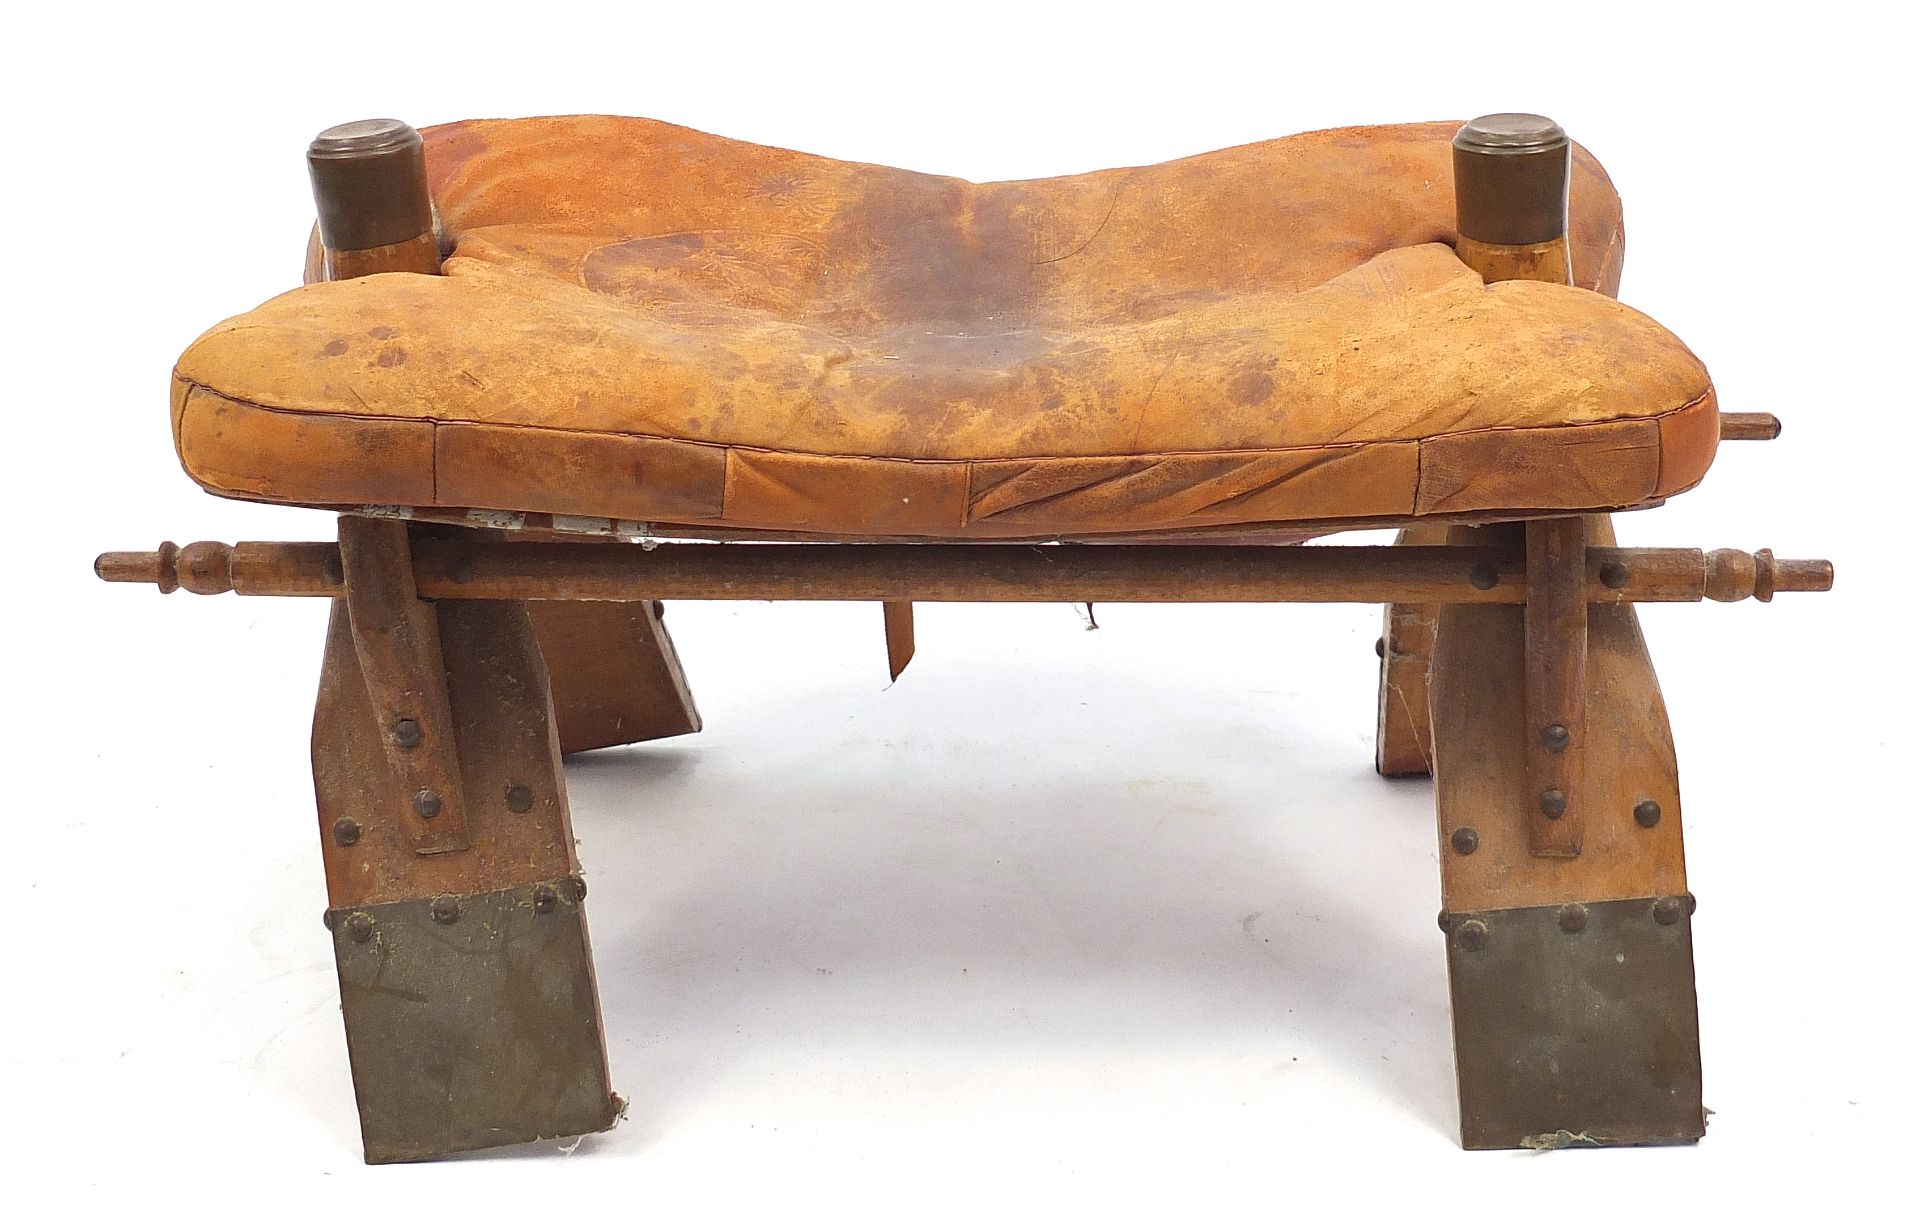 Wooden camel stool with leather cushion, 65cm wide - Image 2 of 5